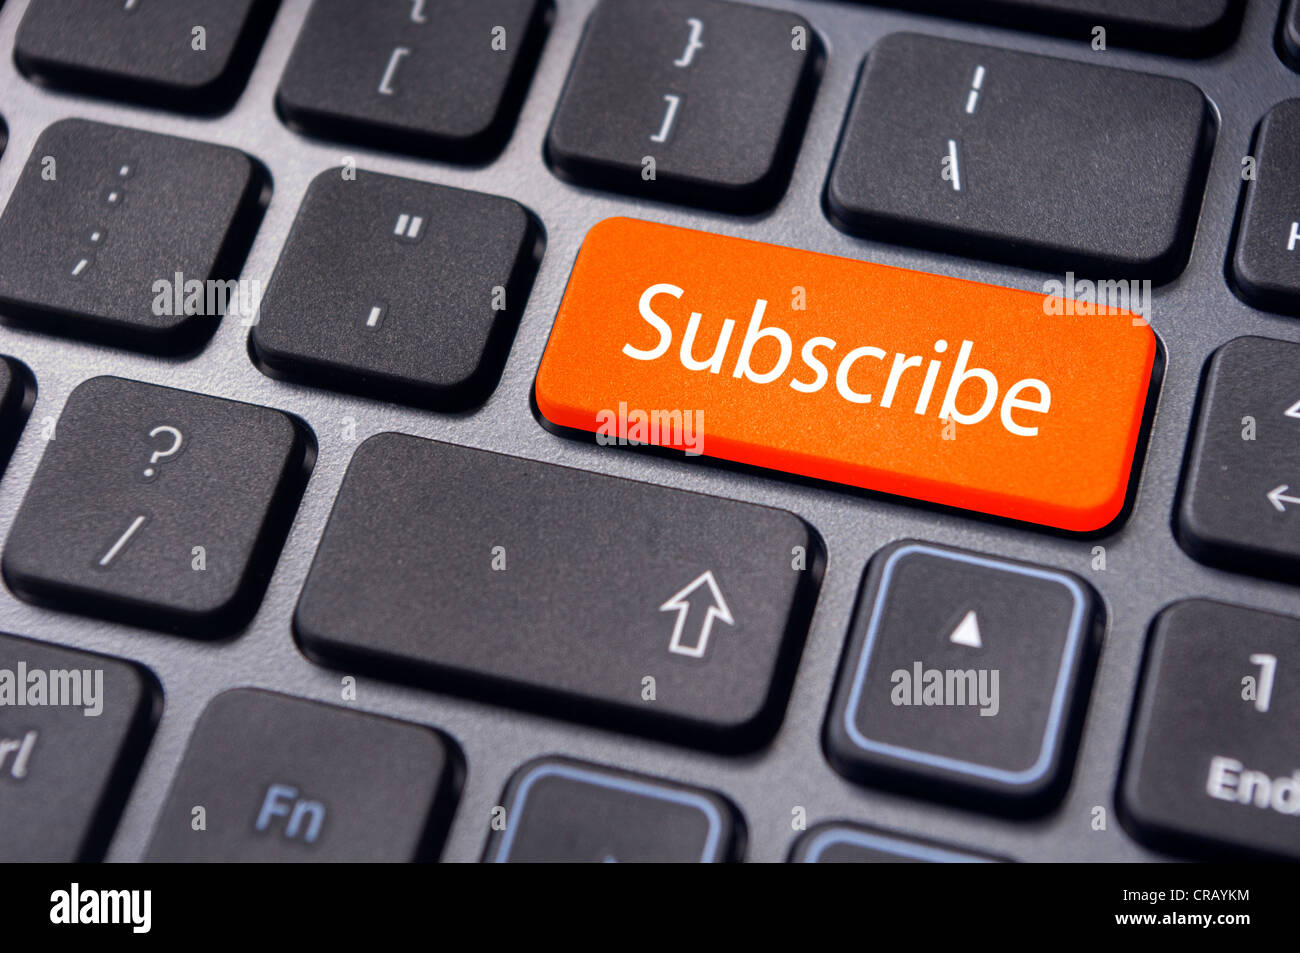 a subscribe message on keyboard enter key, for conceptual usage. Stock Photo